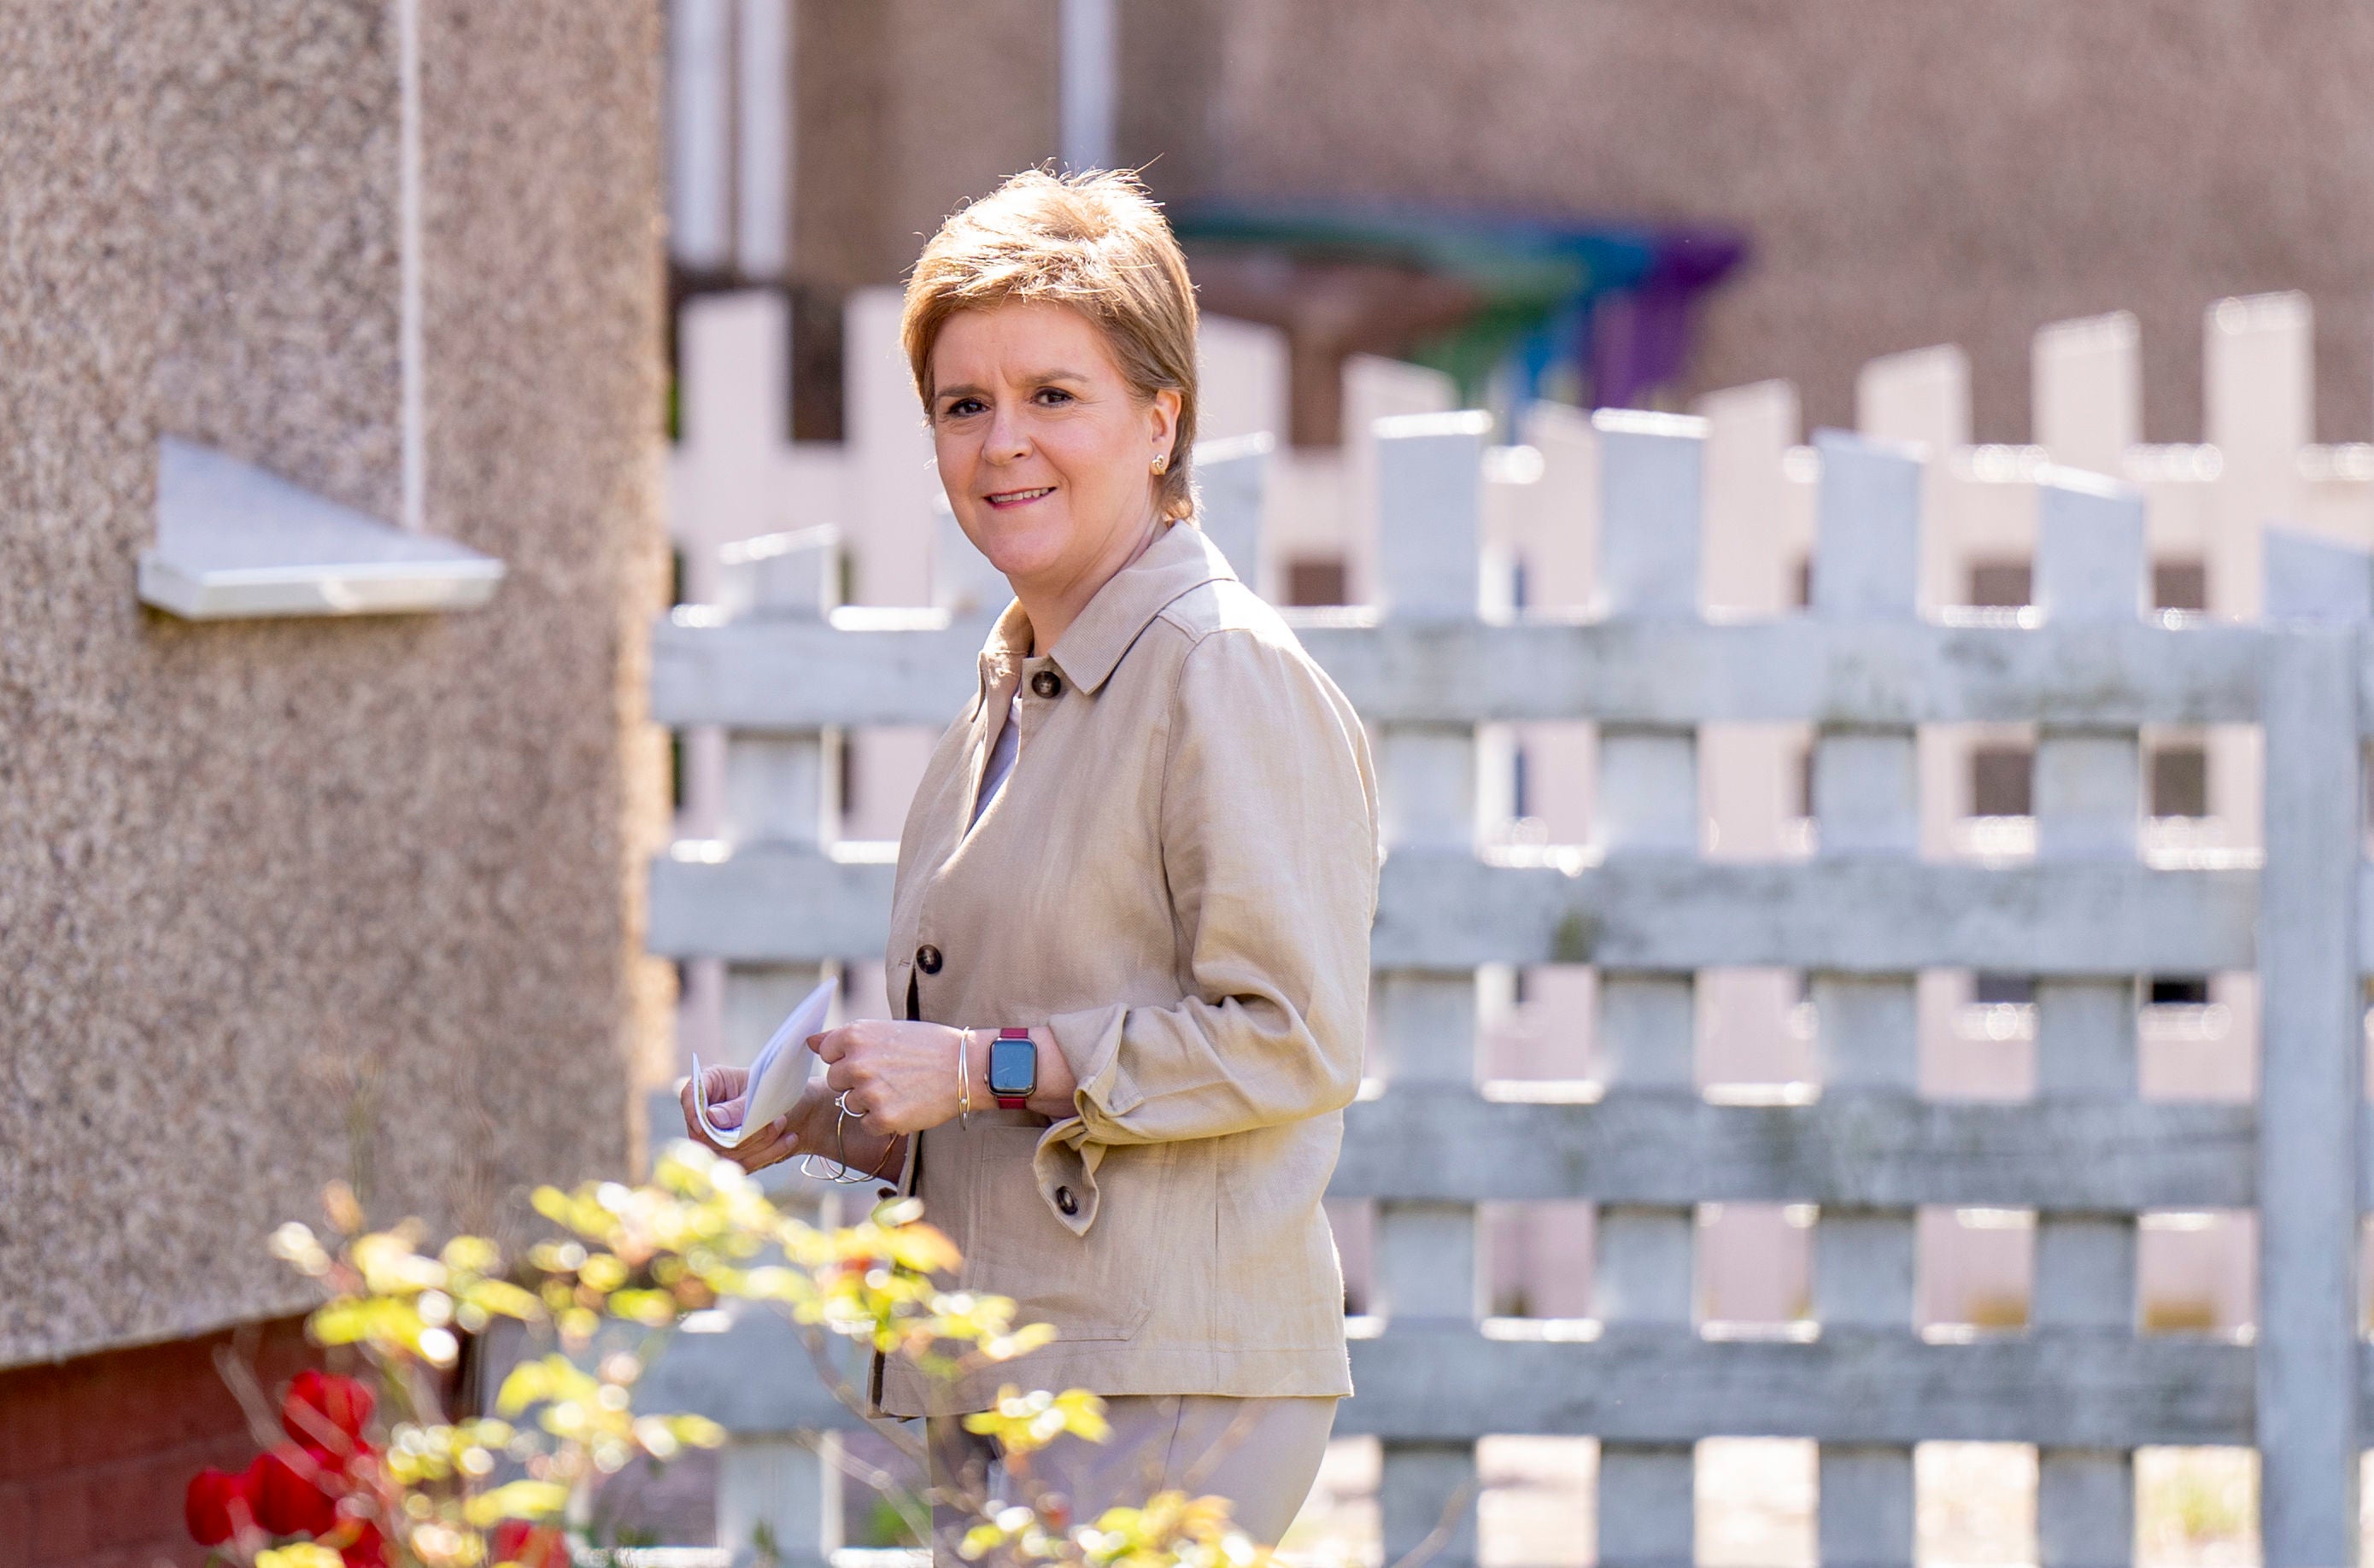 Nicola Sturgeon, Scotland’s first minister, on the campaign trail